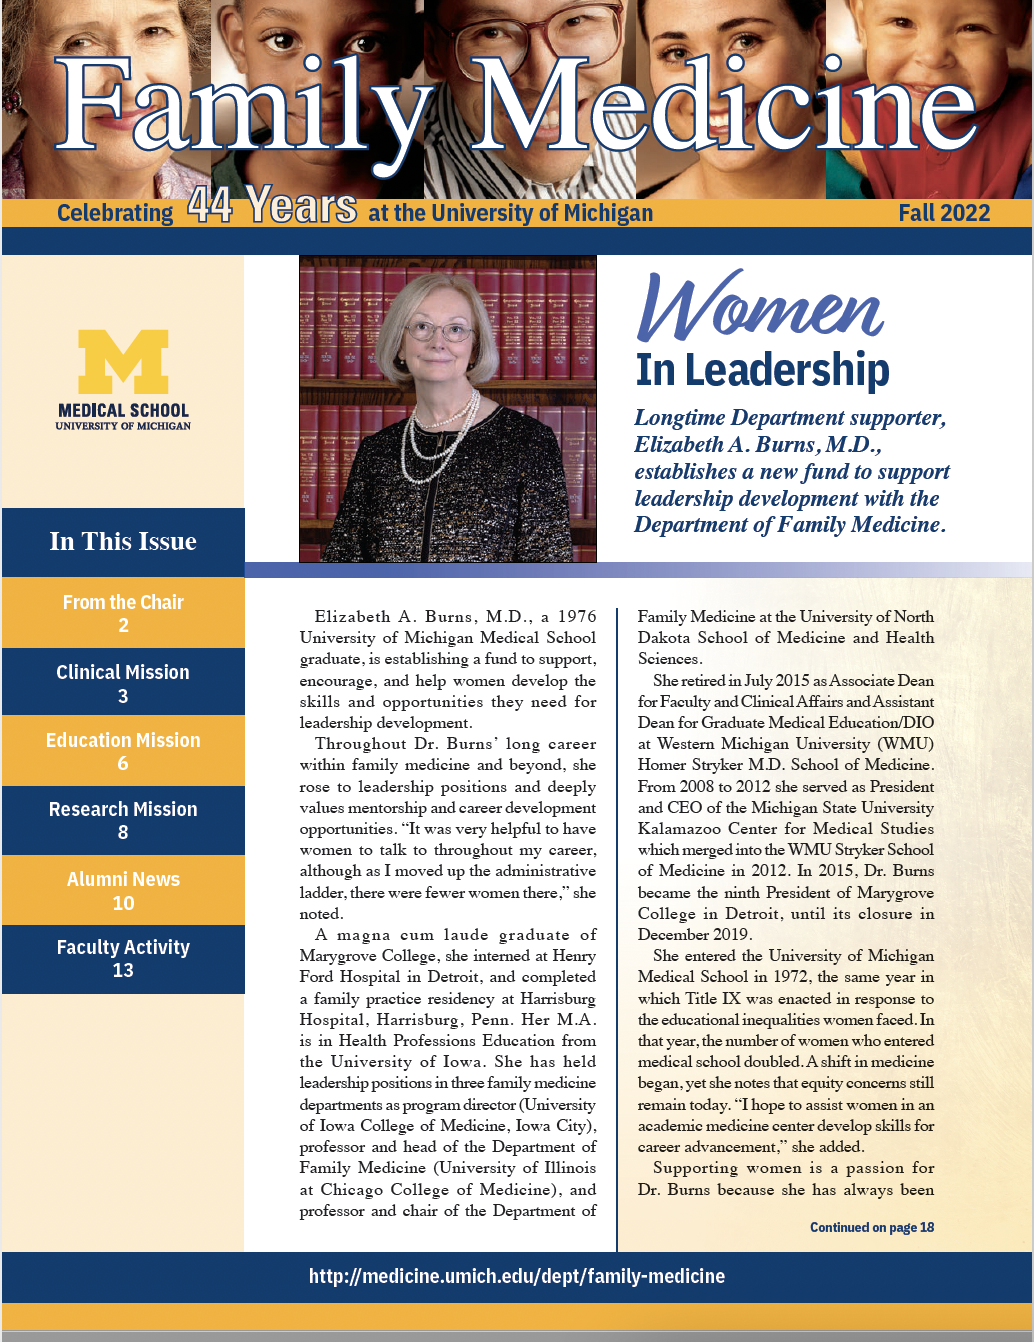 Cover of Family Medicine Newsletter. Headline reads: Women In Leadership Longtime Department supporter, Elizabeth A. Burns, M.D., establishes a new fund to support leadership development with the Department of Family Medicine.